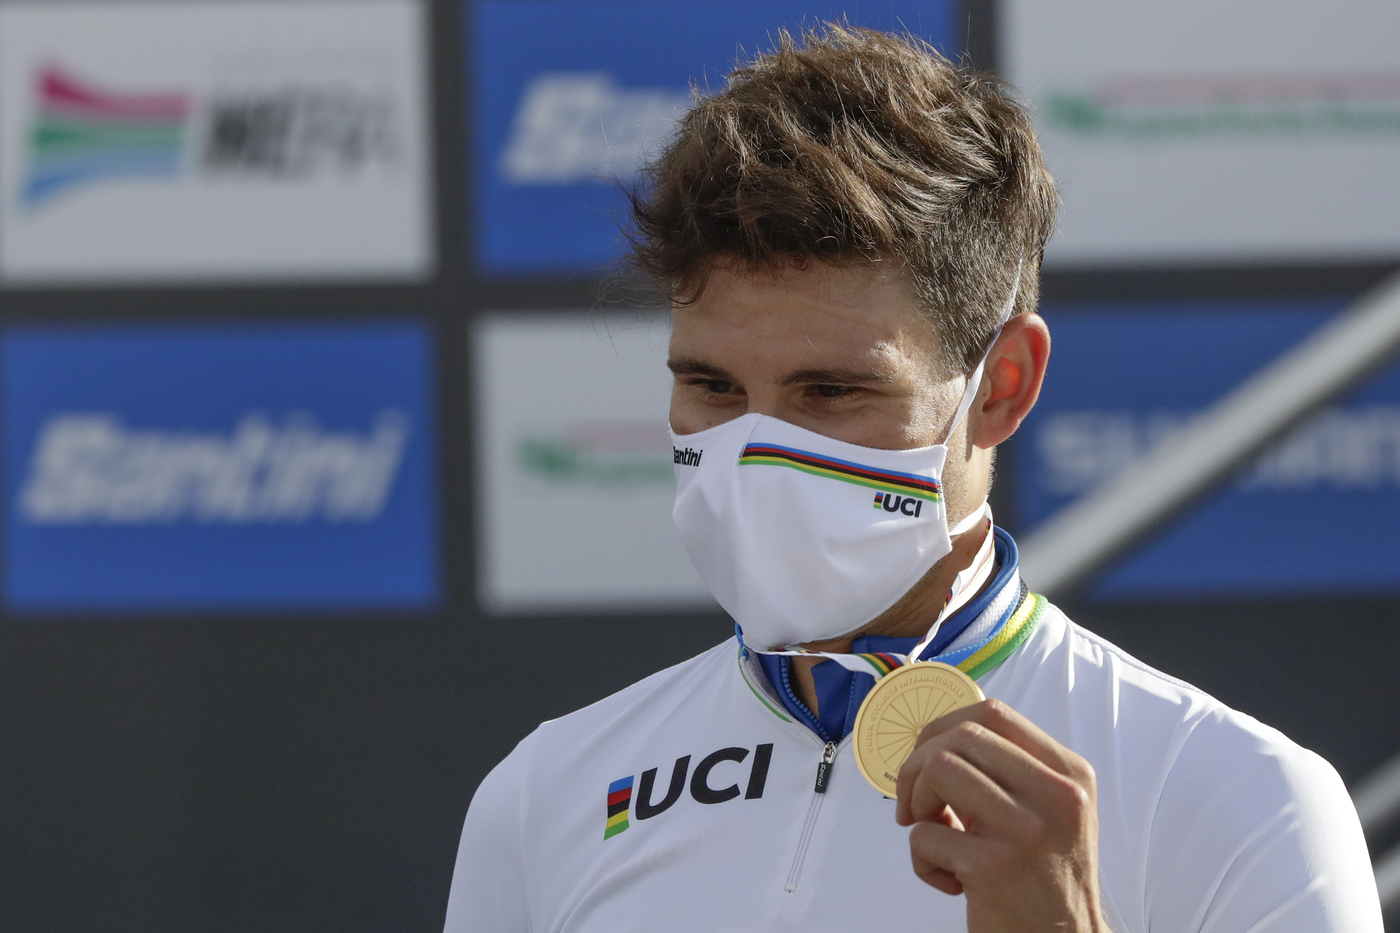 Italy's Filippo Ganna shows his gold medal of the men's Individual Time Trial event, at the road cycling World Championships, in Imola, Italy, Friday, Sept. 25, 2020. (AP Photo/Andrew Medichini)